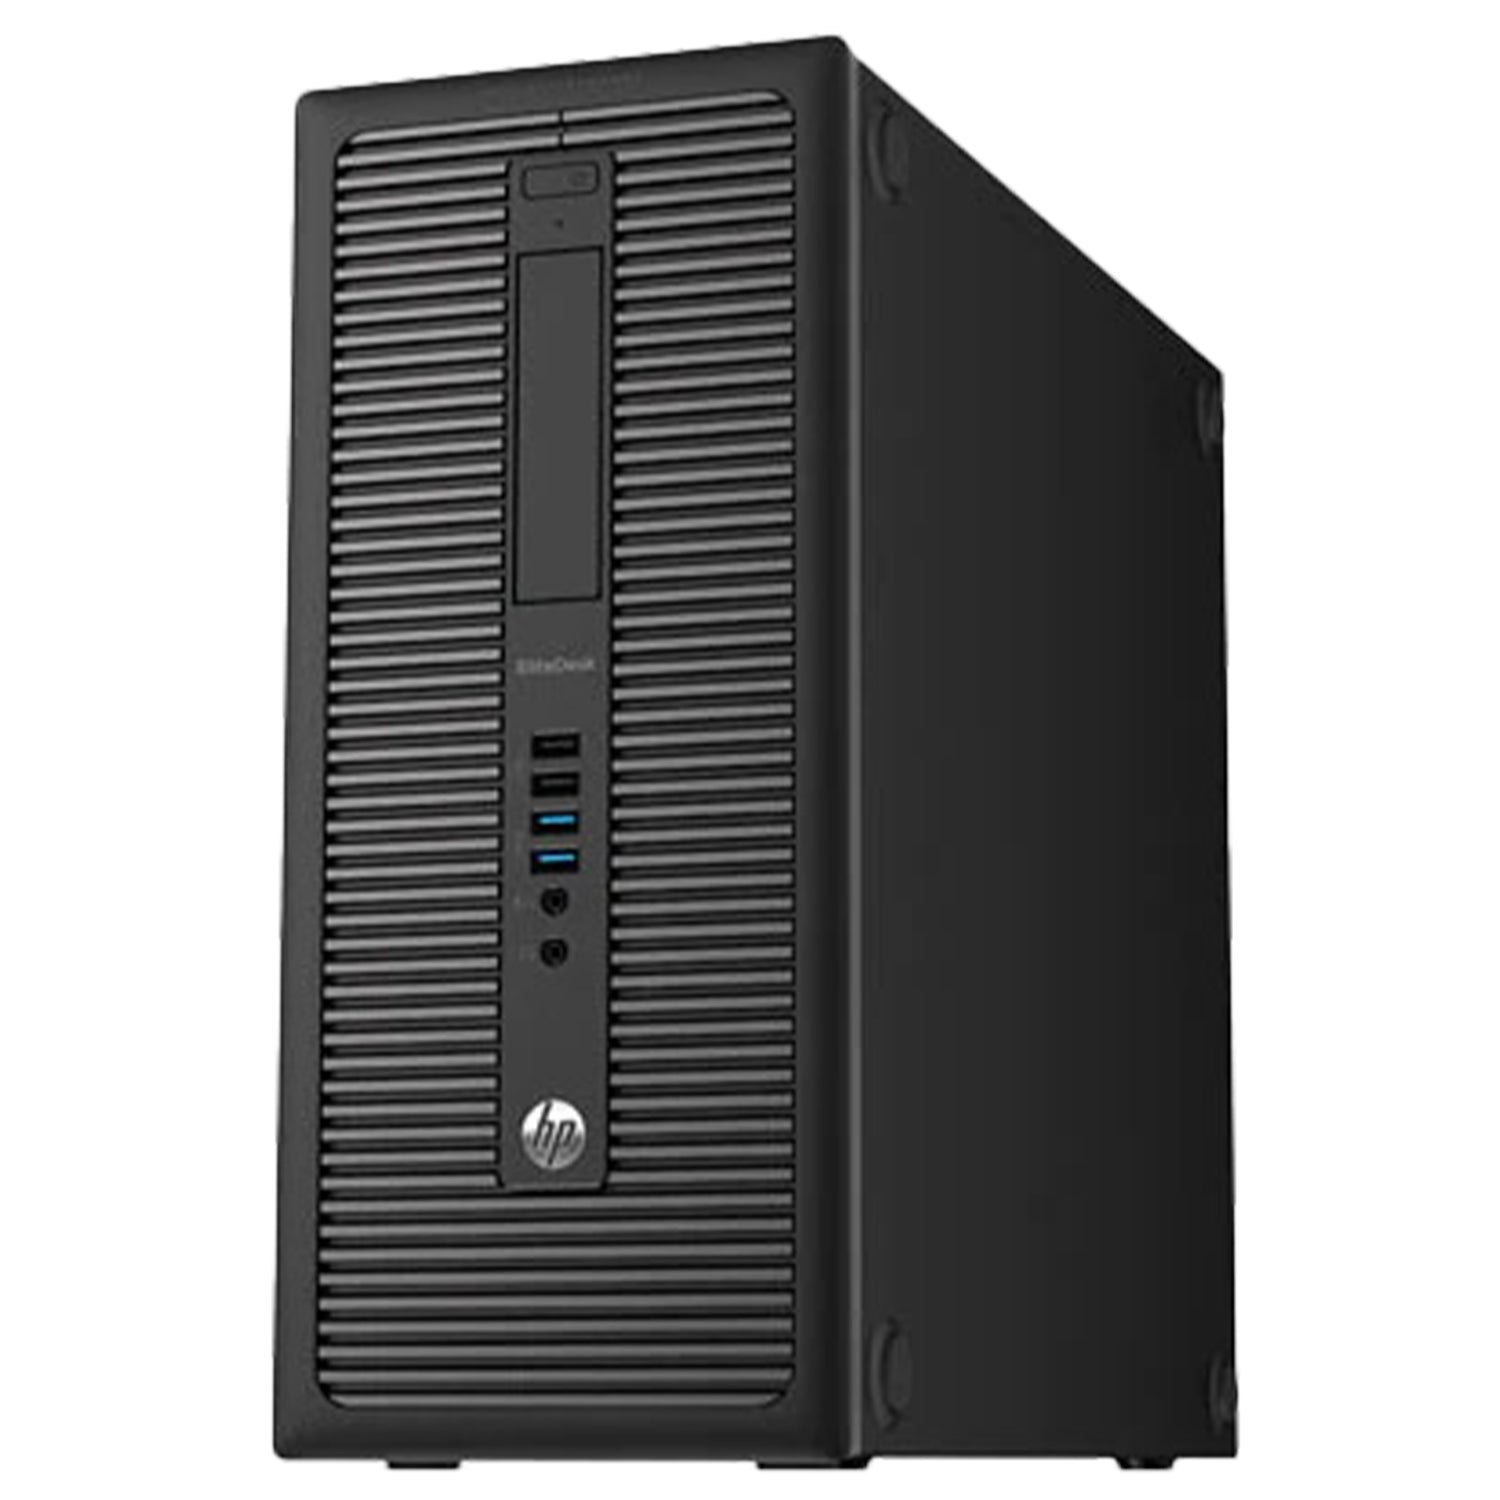 Hp EliteDesk 800 G1 Tower Desktop Computer PC (Intel core i5 - 4th Gen up to 3.60 GHz/ 8GB - 32GB RAM/ 256GB - 1TB SSD/ Windows 10 Pro) Keyboard and Mouse/ WIFI/ Bluetooth - Refurbished